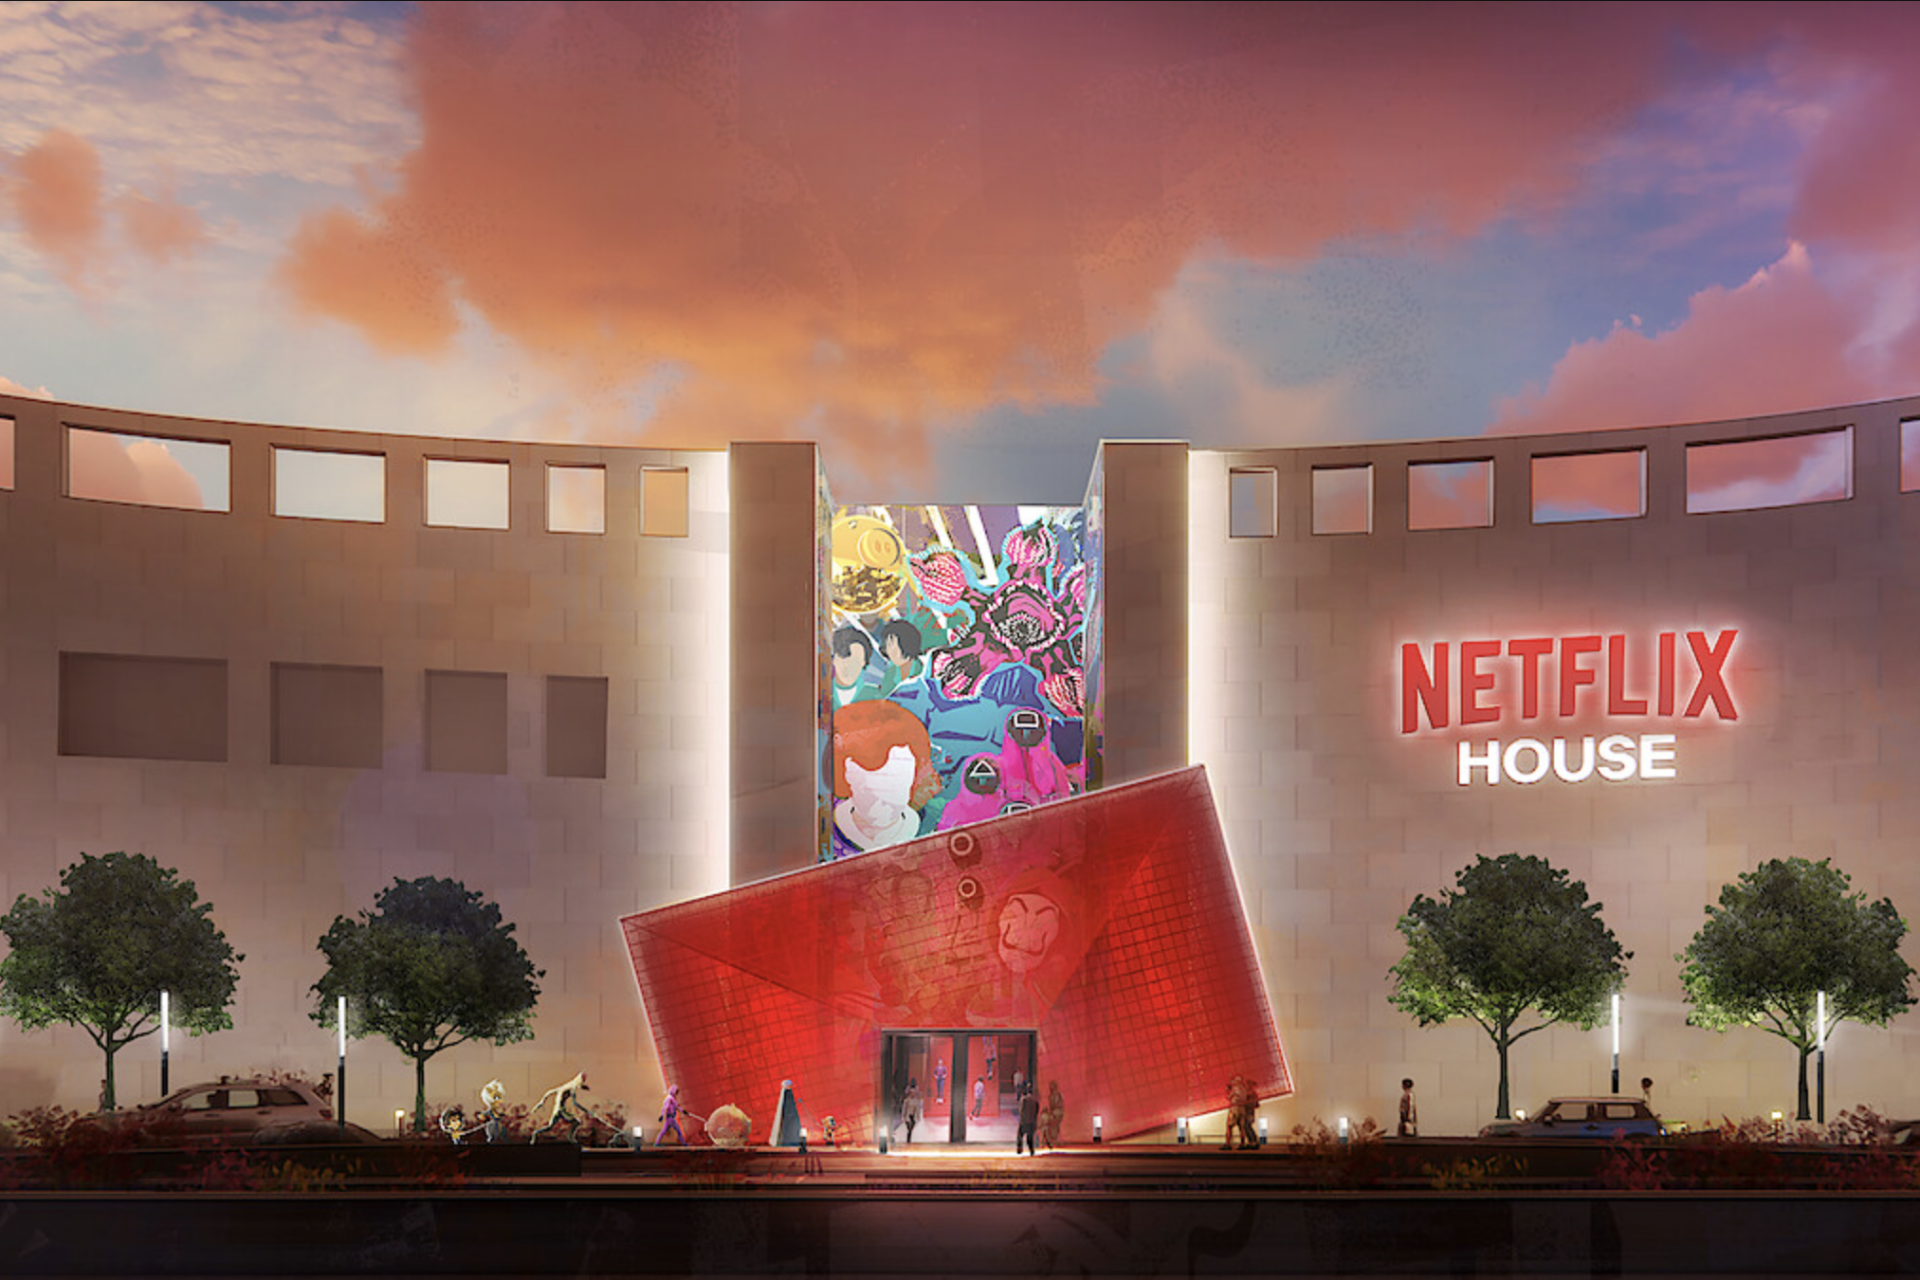 'Netflix House' shopping centers: when and where can we find them?